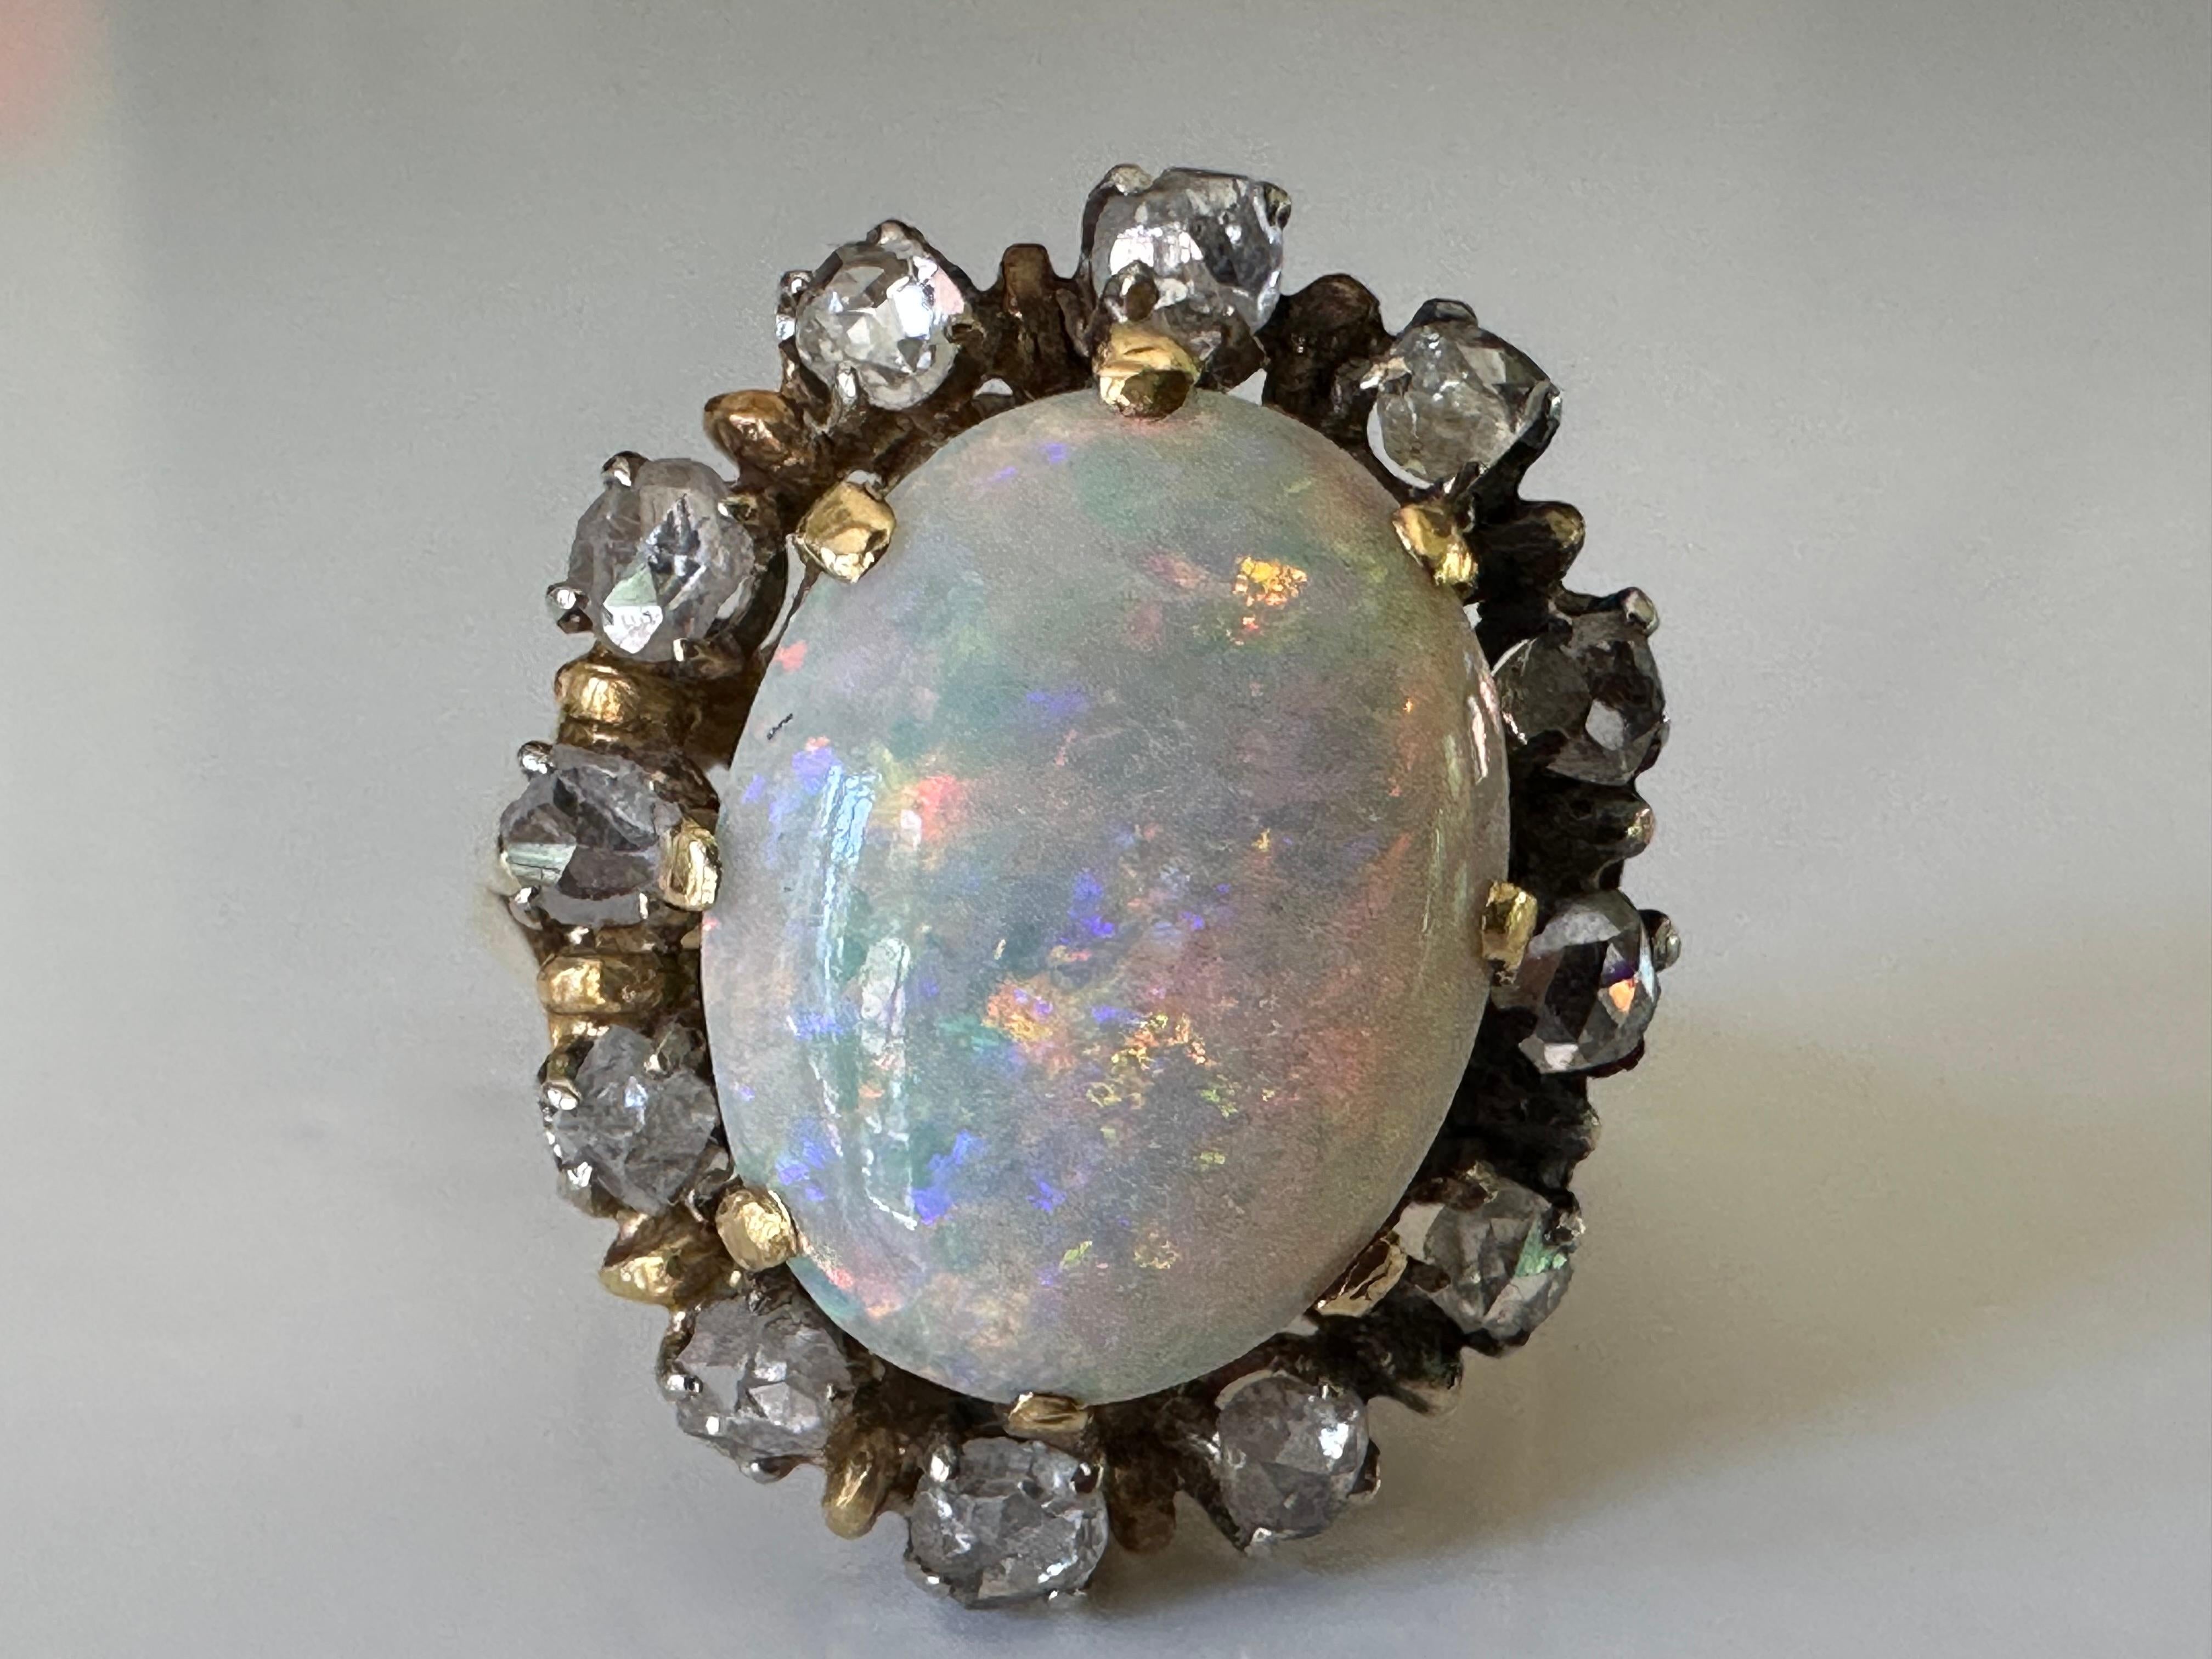 A 3.0-carat luminous Australian opal with iridescent hues of blue, green, yellow, orange and pink centers this exquisite antique ring surrounded by a halo of 0.85 carats of rose-cut diamonds. Set in 18K yellow gold.  Circa mid-to-late-19th century.